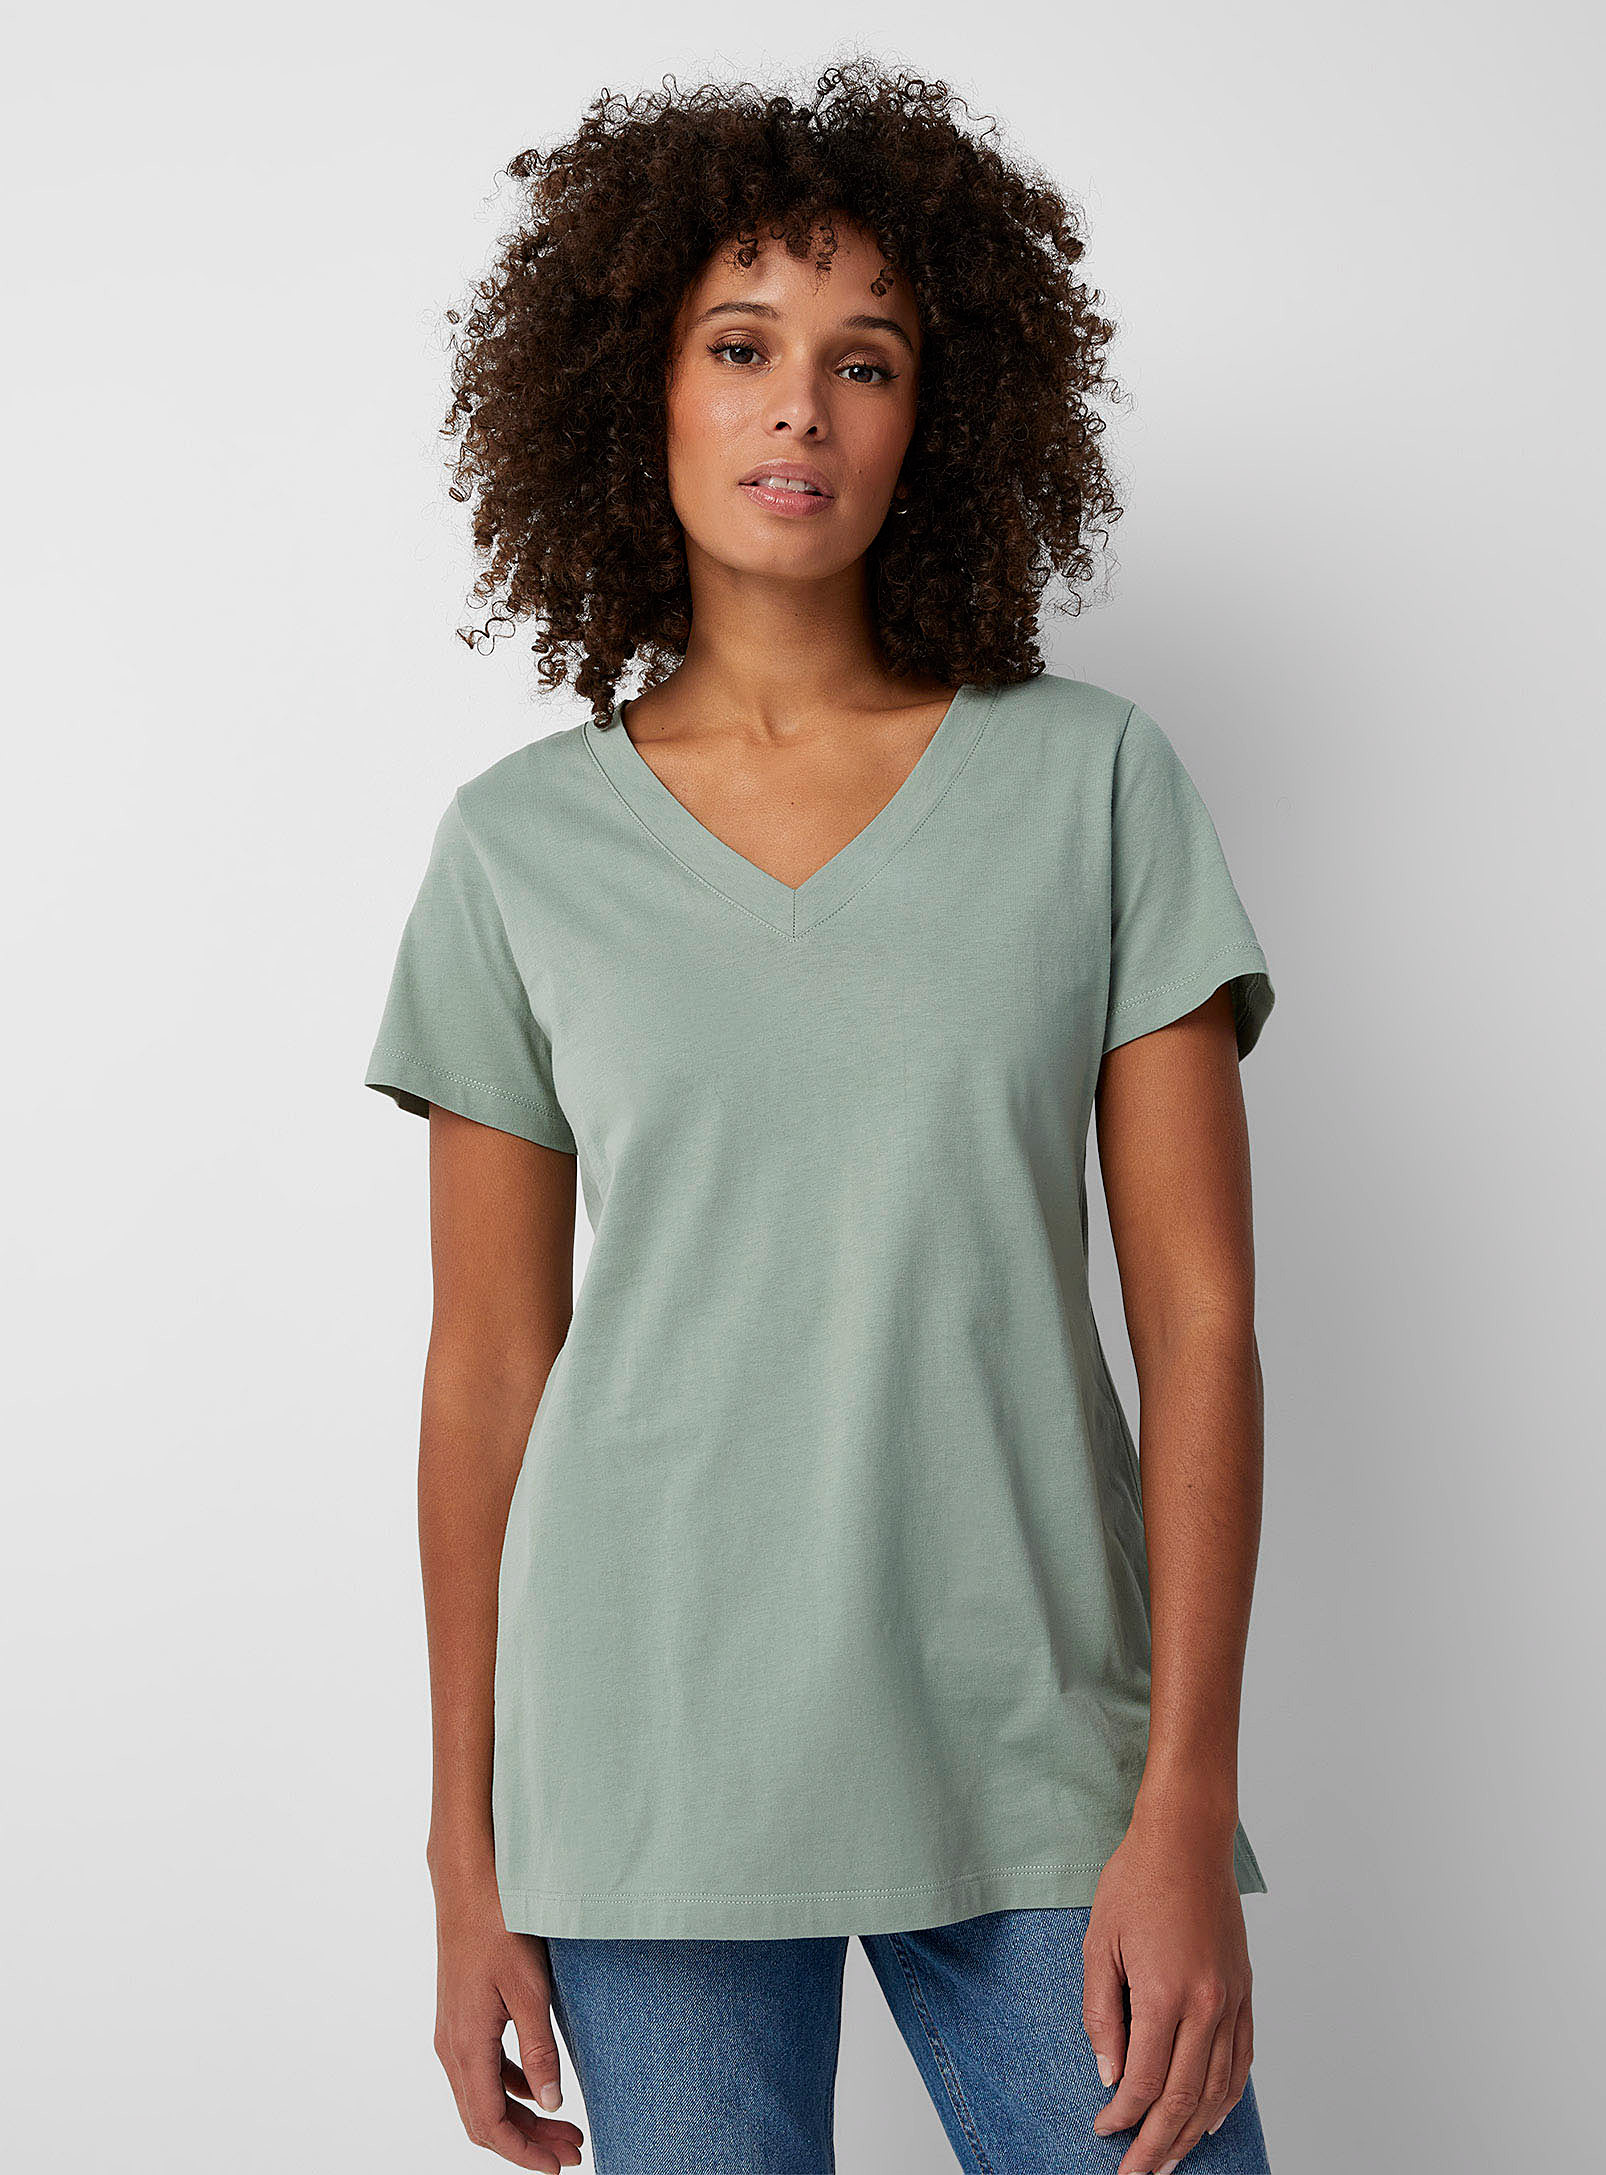 Contemporaine V-neck Tunic T-shirt In Mossy Green